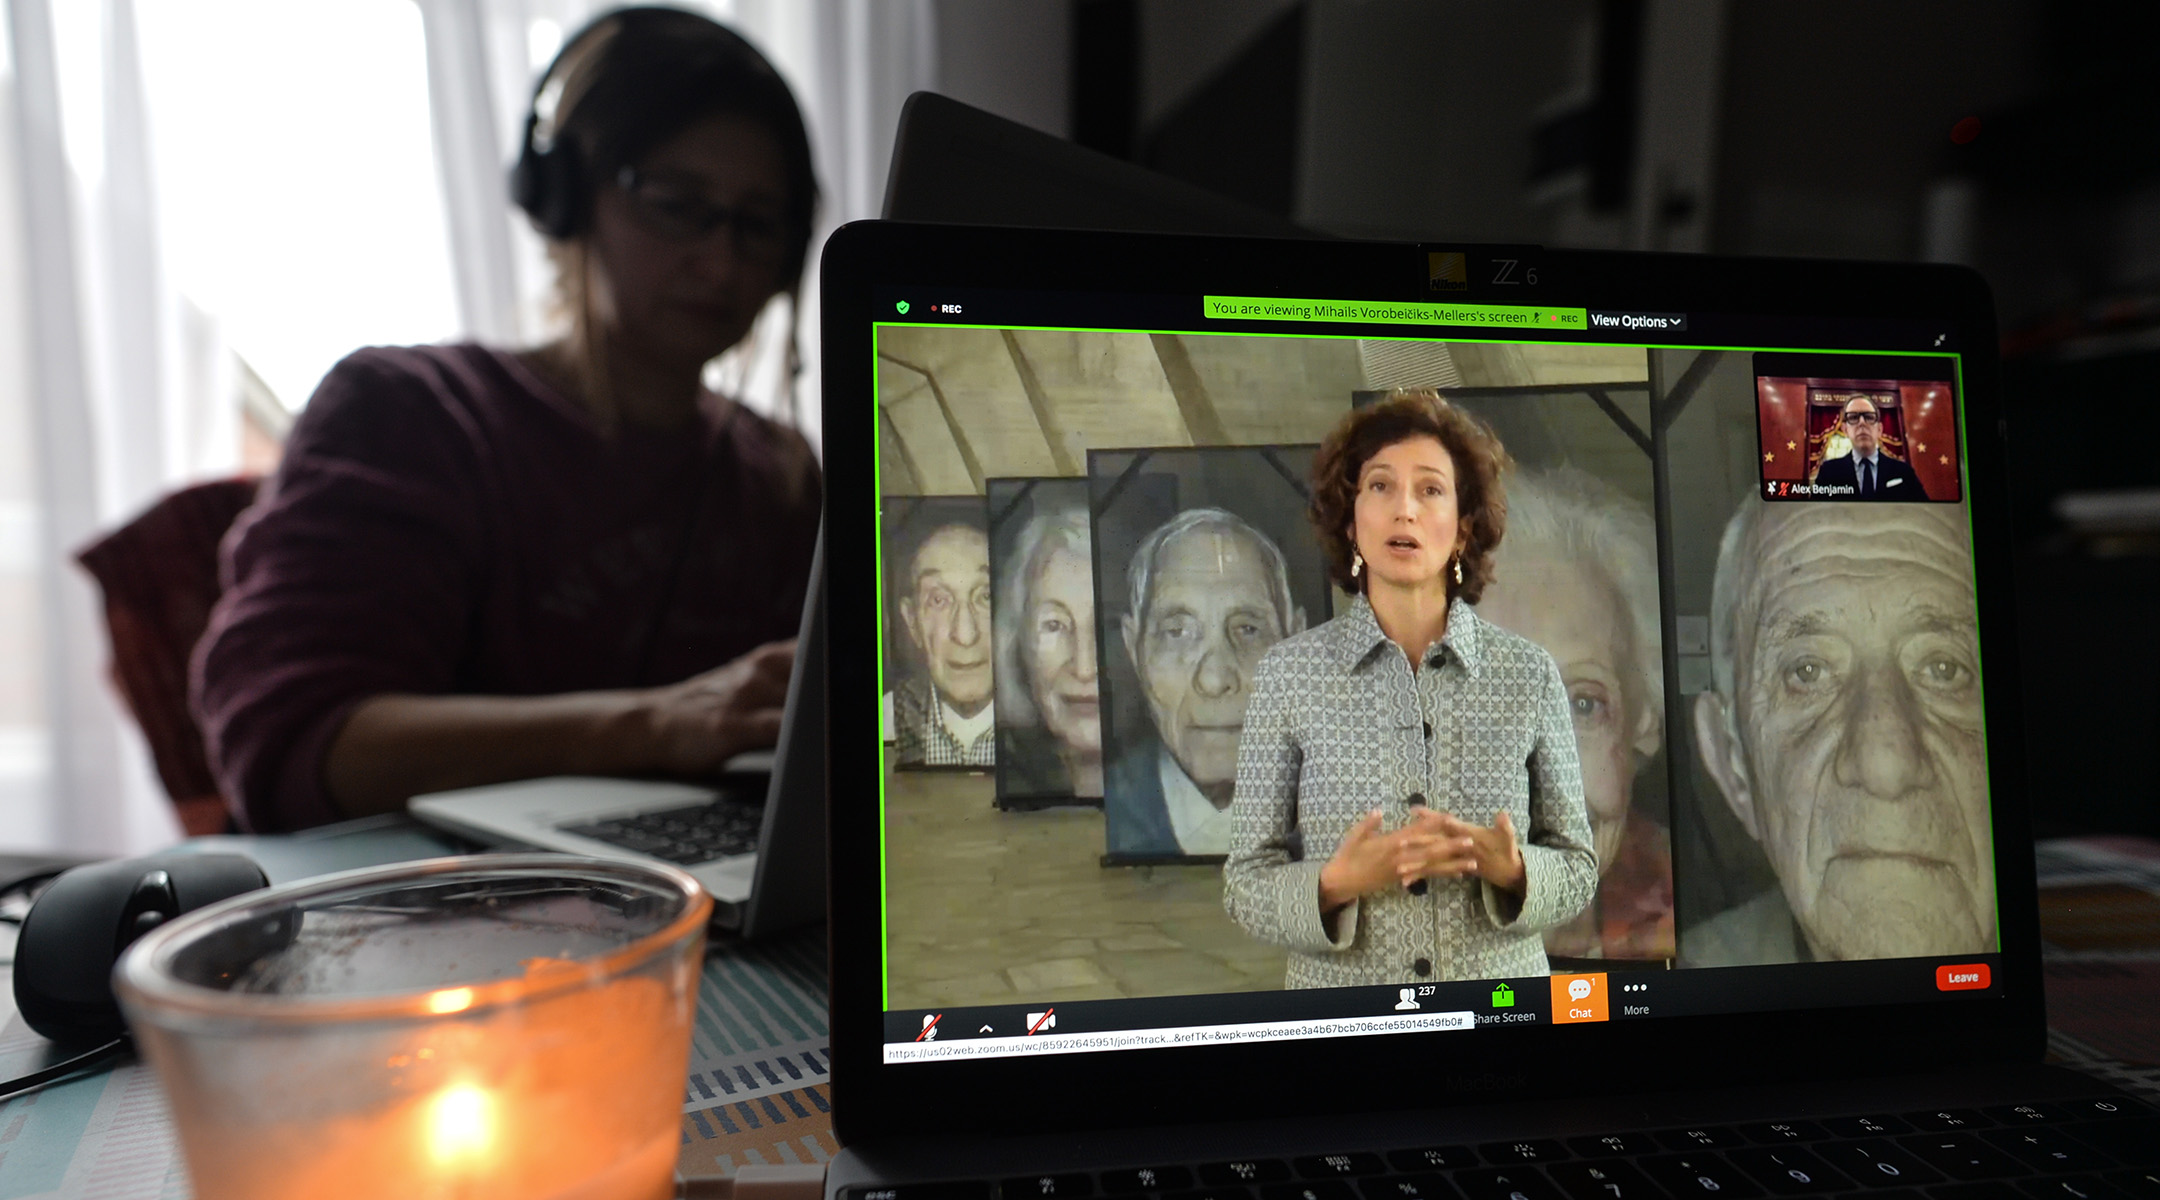 A woman watches Audrey Azoulay, UNESCO’s director-general, speak during an online commemoration on International Holocaust Remembrance Day in Dublin, Jan. 27, 2021. (Artur Widak/NurPhoto via Getty Images)